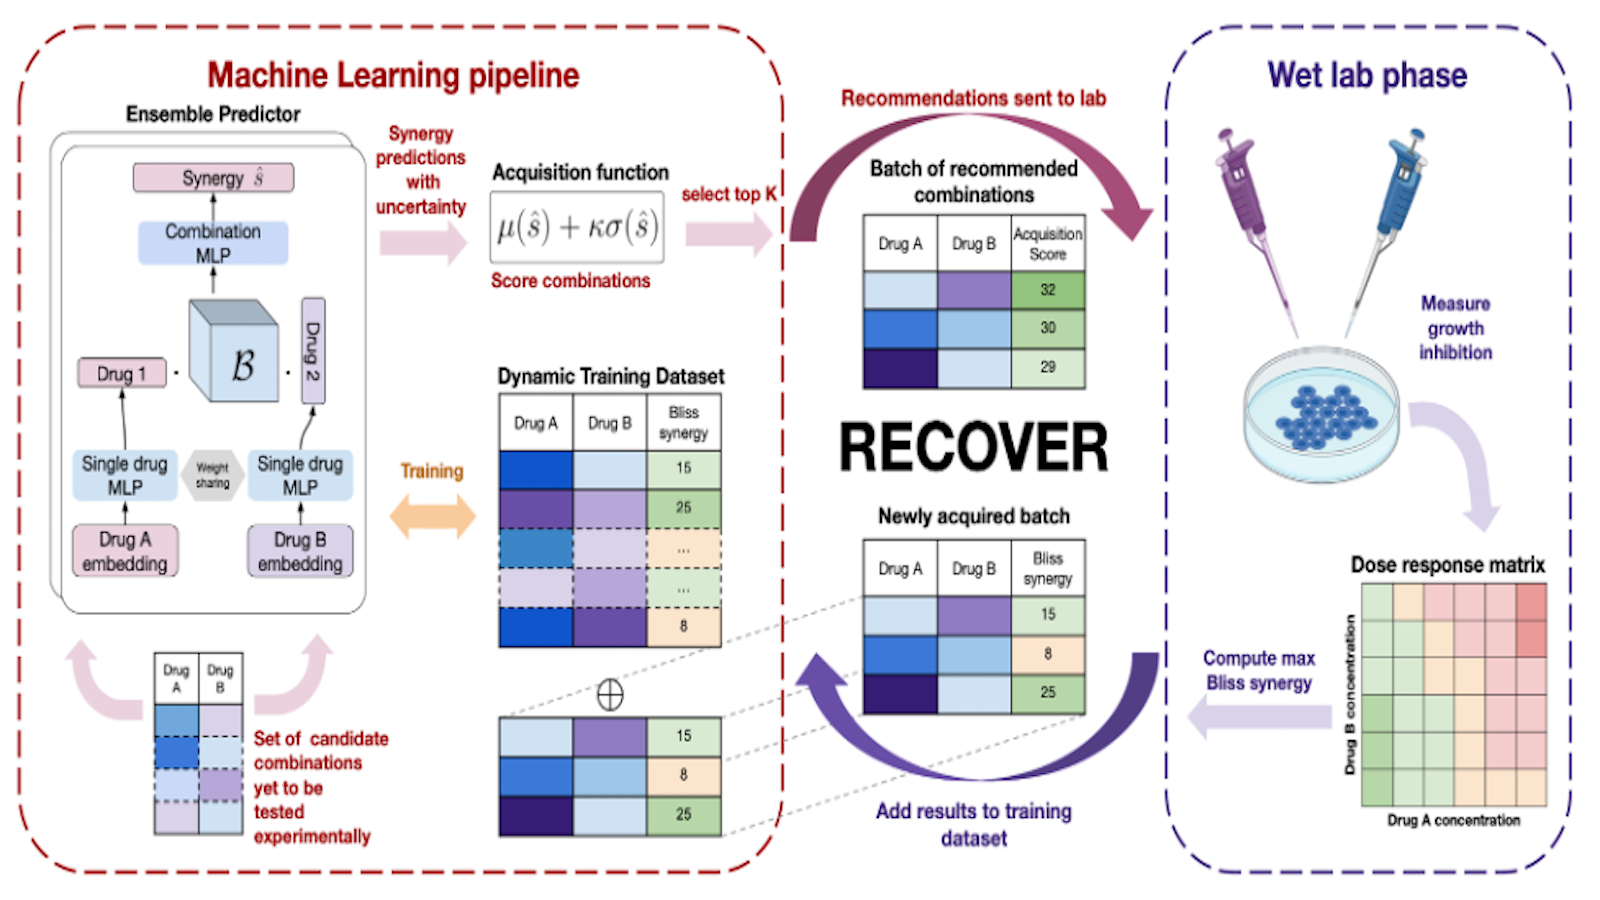 Figure 1. Overview of the RECOVER workflow integrating both a novel machine learning pipeline and iterated wet lab evaluation